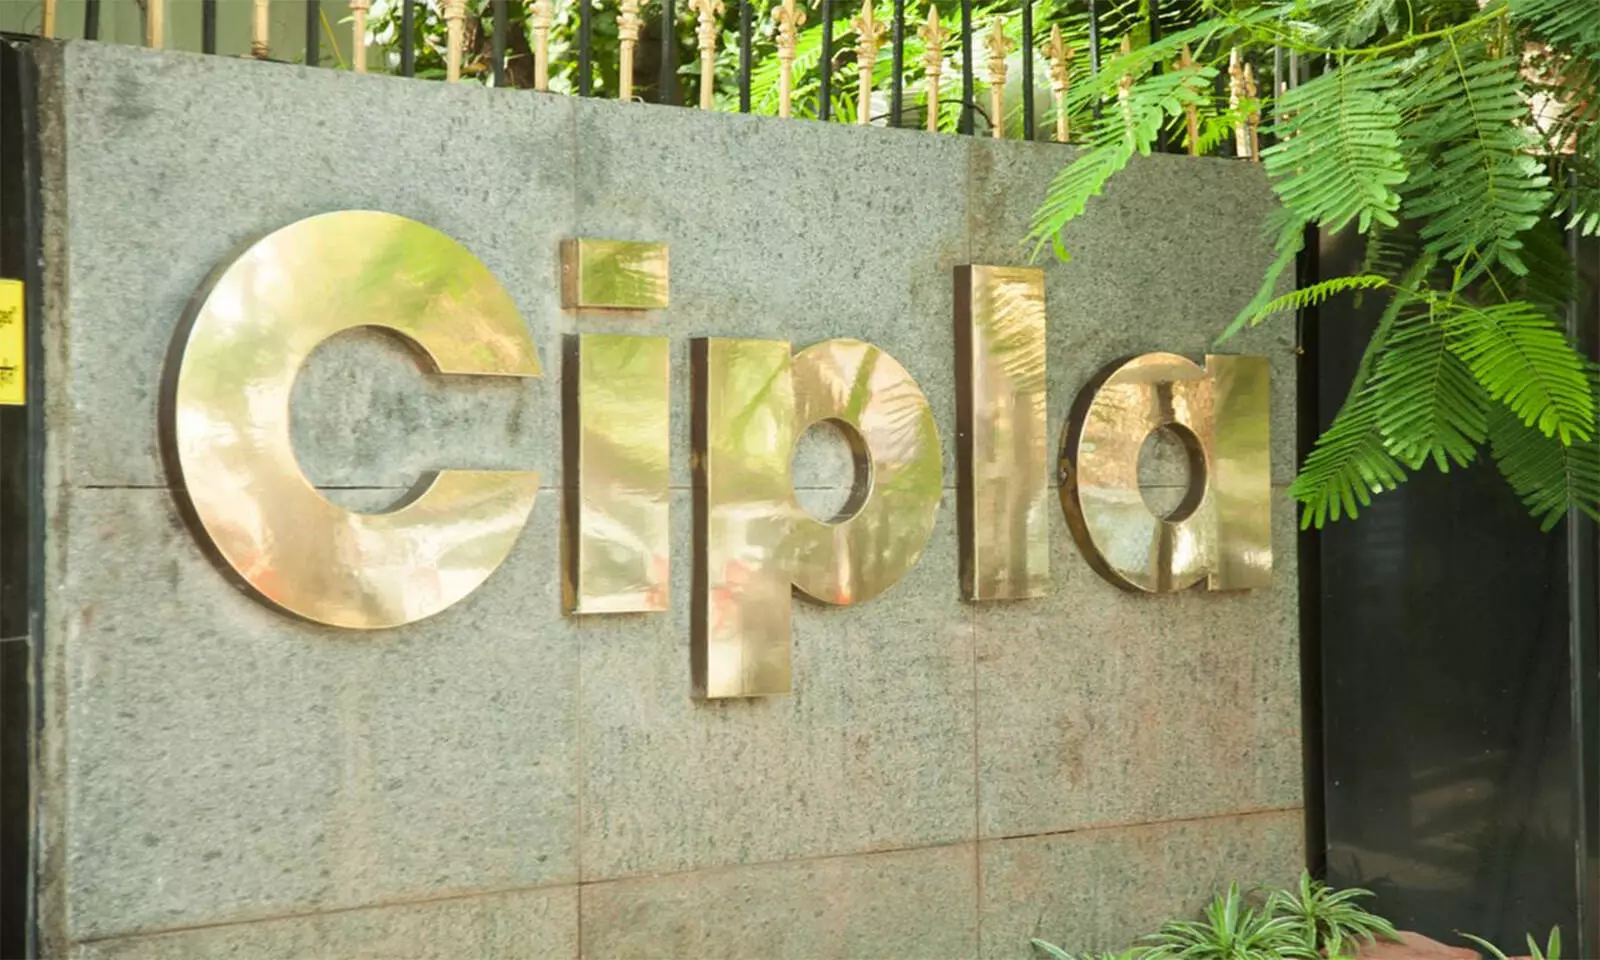 Cipla betting big on emerging segments to drive its next phase of growth